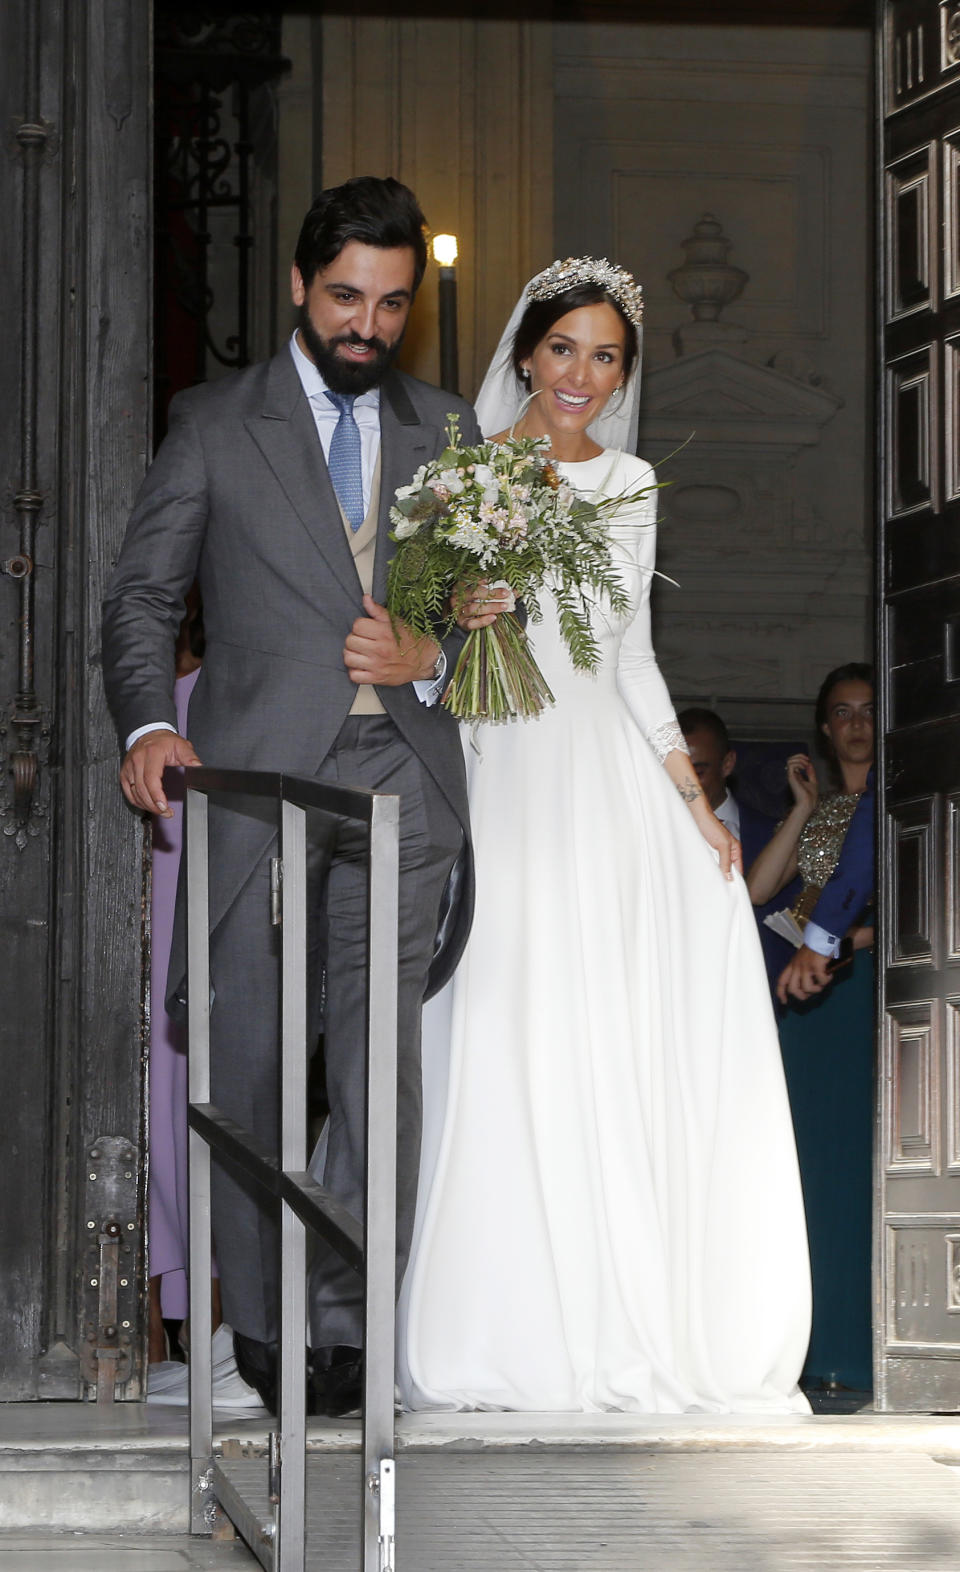 SEVILLE, SPAIN - JUNE 29:  Rocío Osorno wedding at at Seville's Cathedral on June 29, 2019 in Seville, Spain. (Photo by Europa Press Entertainment/Europa Press via Getty Images)